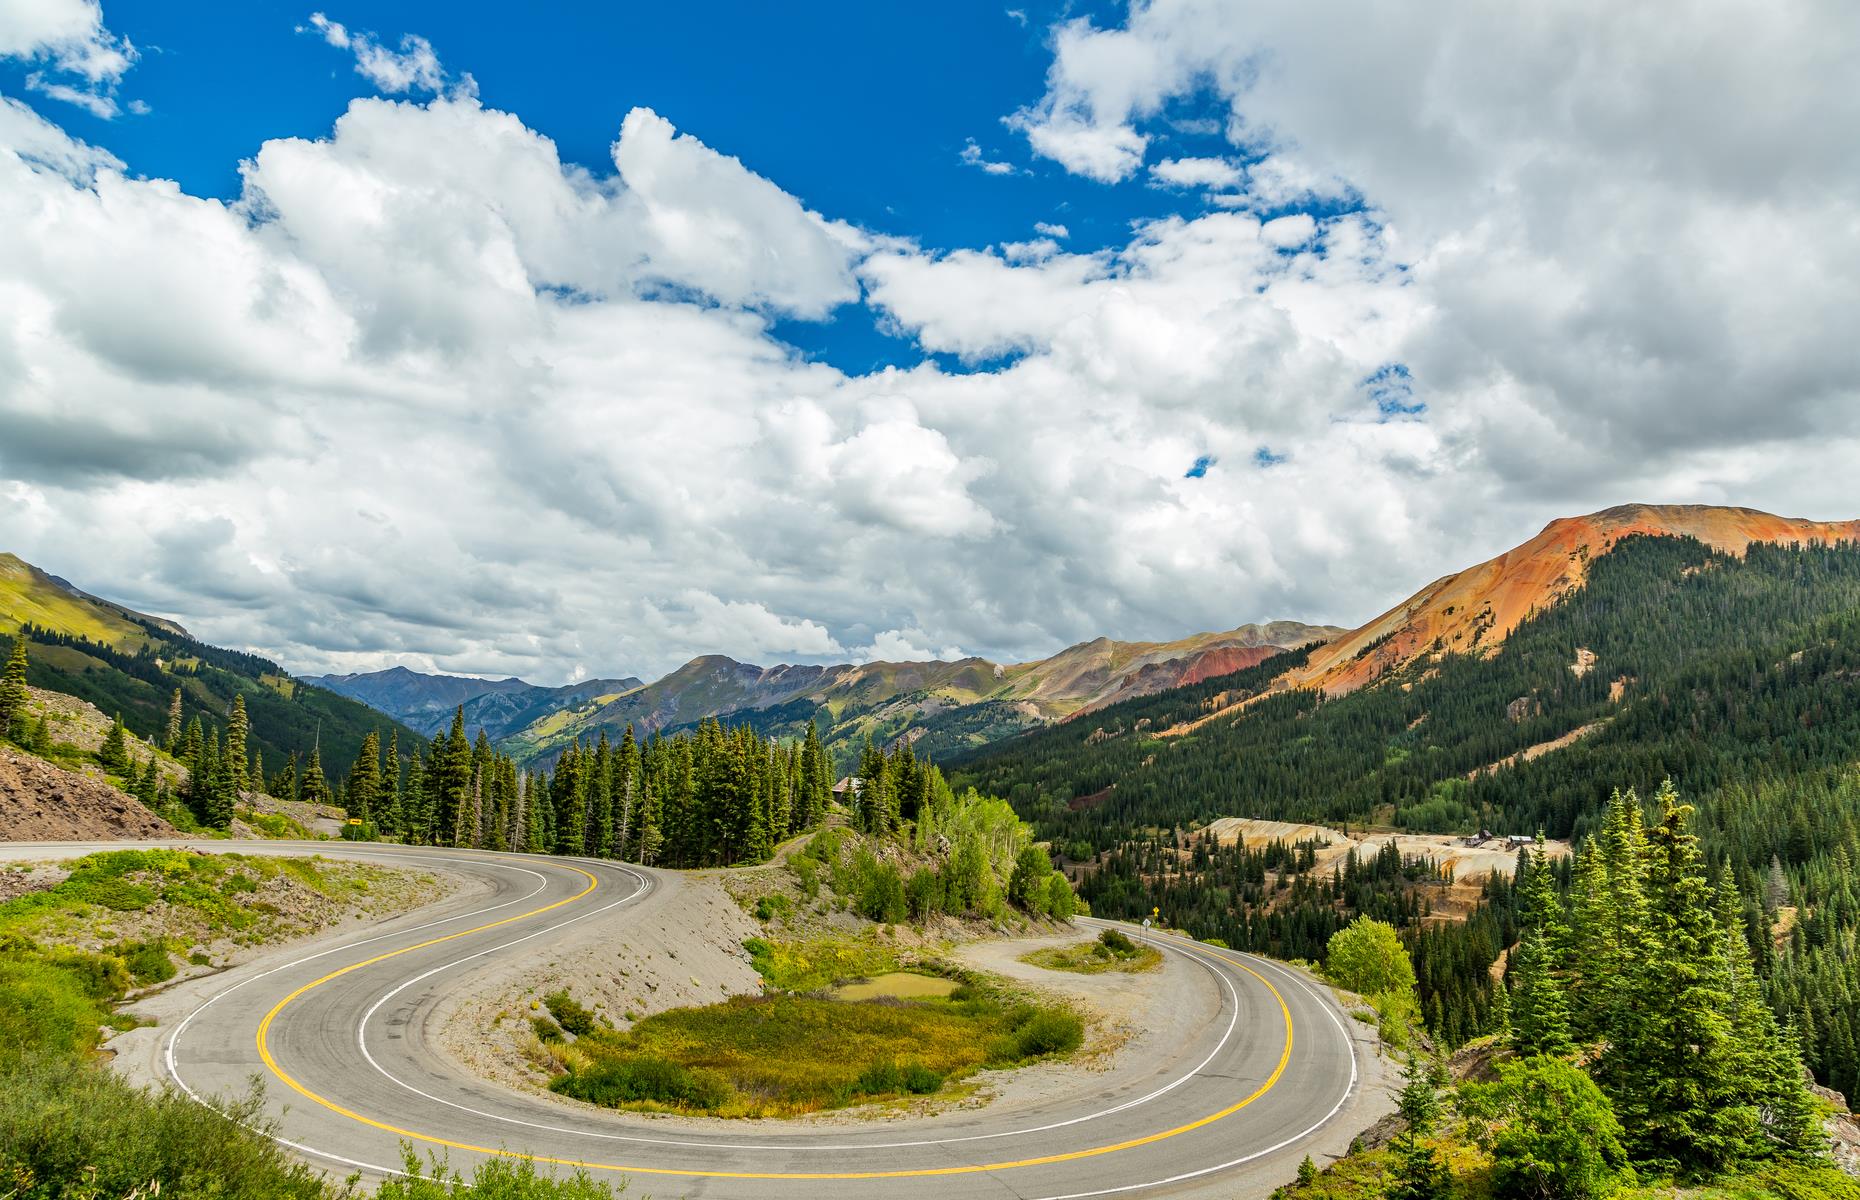 This 236-mile (380km) Scenic Byway cuts through the San Juan Mountains, which are carpeted with evergreen trees, capped with snow and peppered with photogenic, high-altitude towns. The Skyway is a looping road, extending over Routes 550, 160, 145 and 62, and it reaches from the picturesque town of Ridgway in the north, down to the little city of Durango in the south.